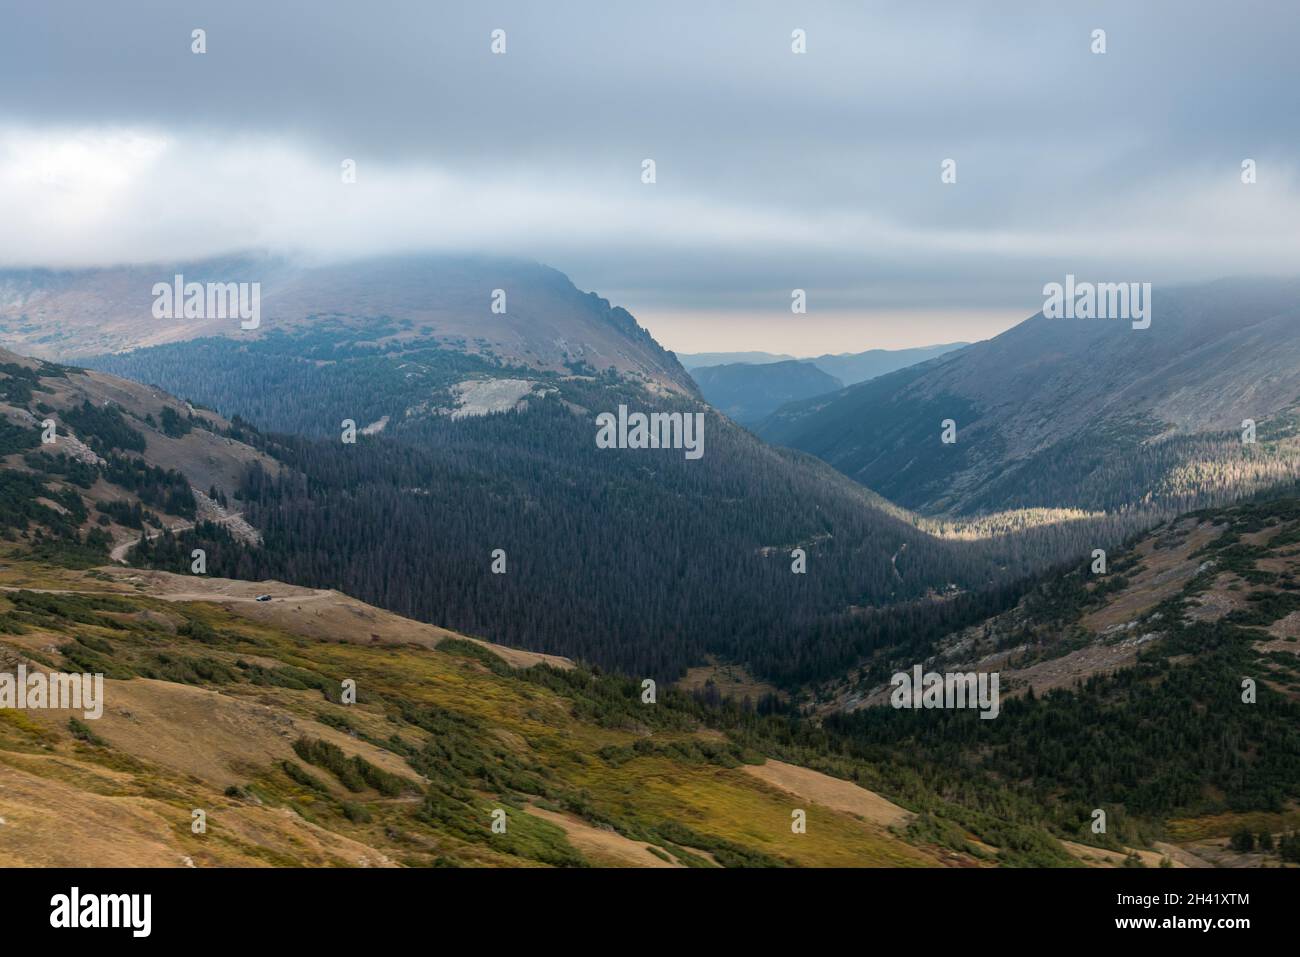 Great view up high in the mountains of Rocky Mountain NP, USA Stock Photo